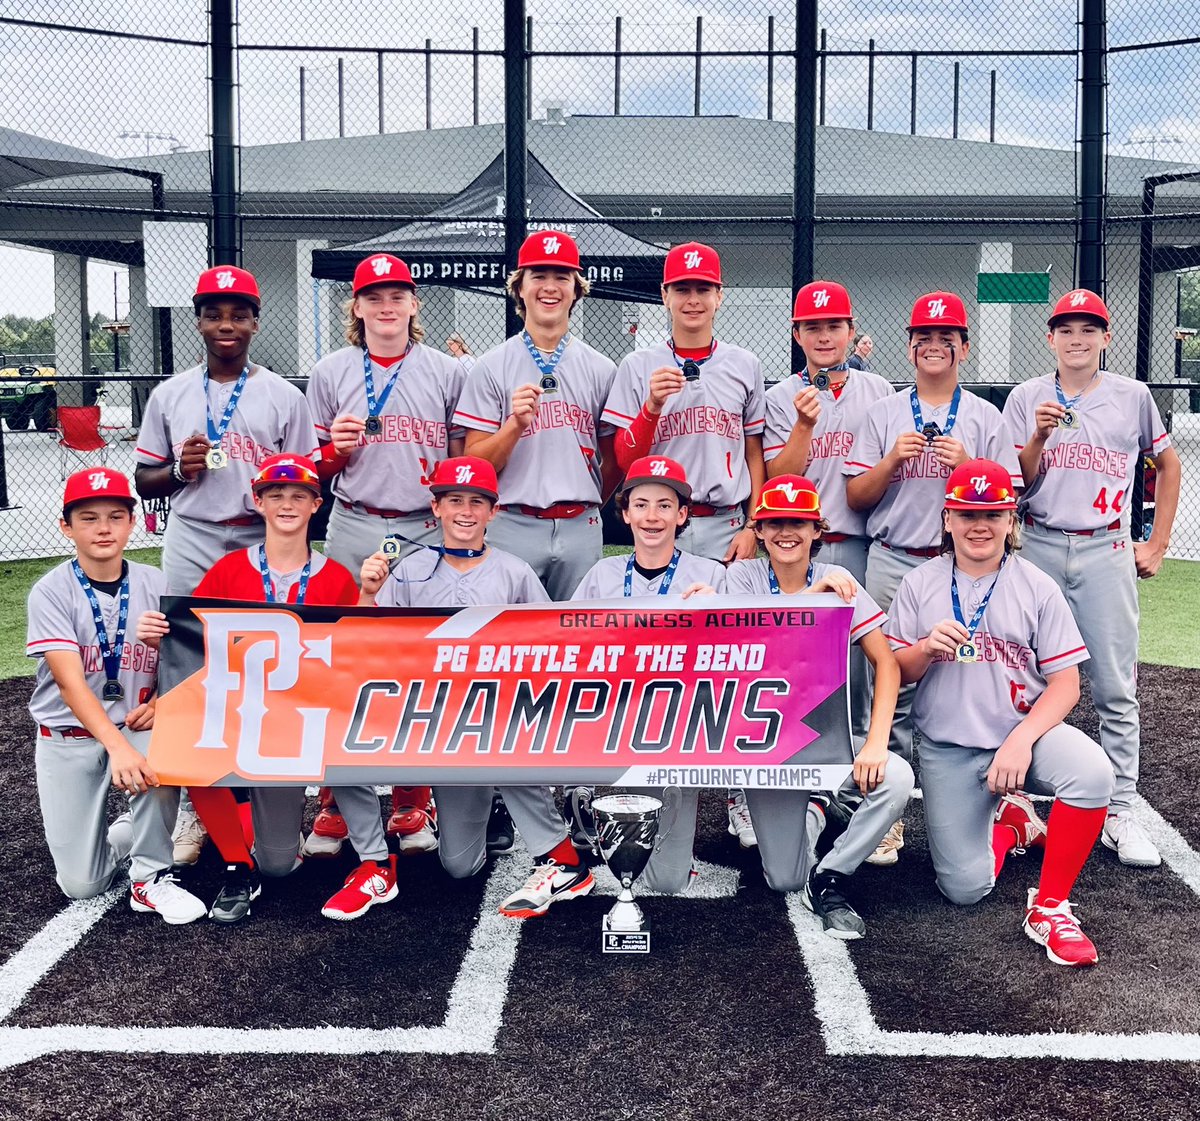 @PG_Tourney 13U Battle at the Bend Champions‼️

TN NATIONALS 13U 🏆 

Boys went 4-1-0 on the weekend scoring 50 runs in 5 games 💥 

#TNkids | #5SP 
@TNNatsRecruits